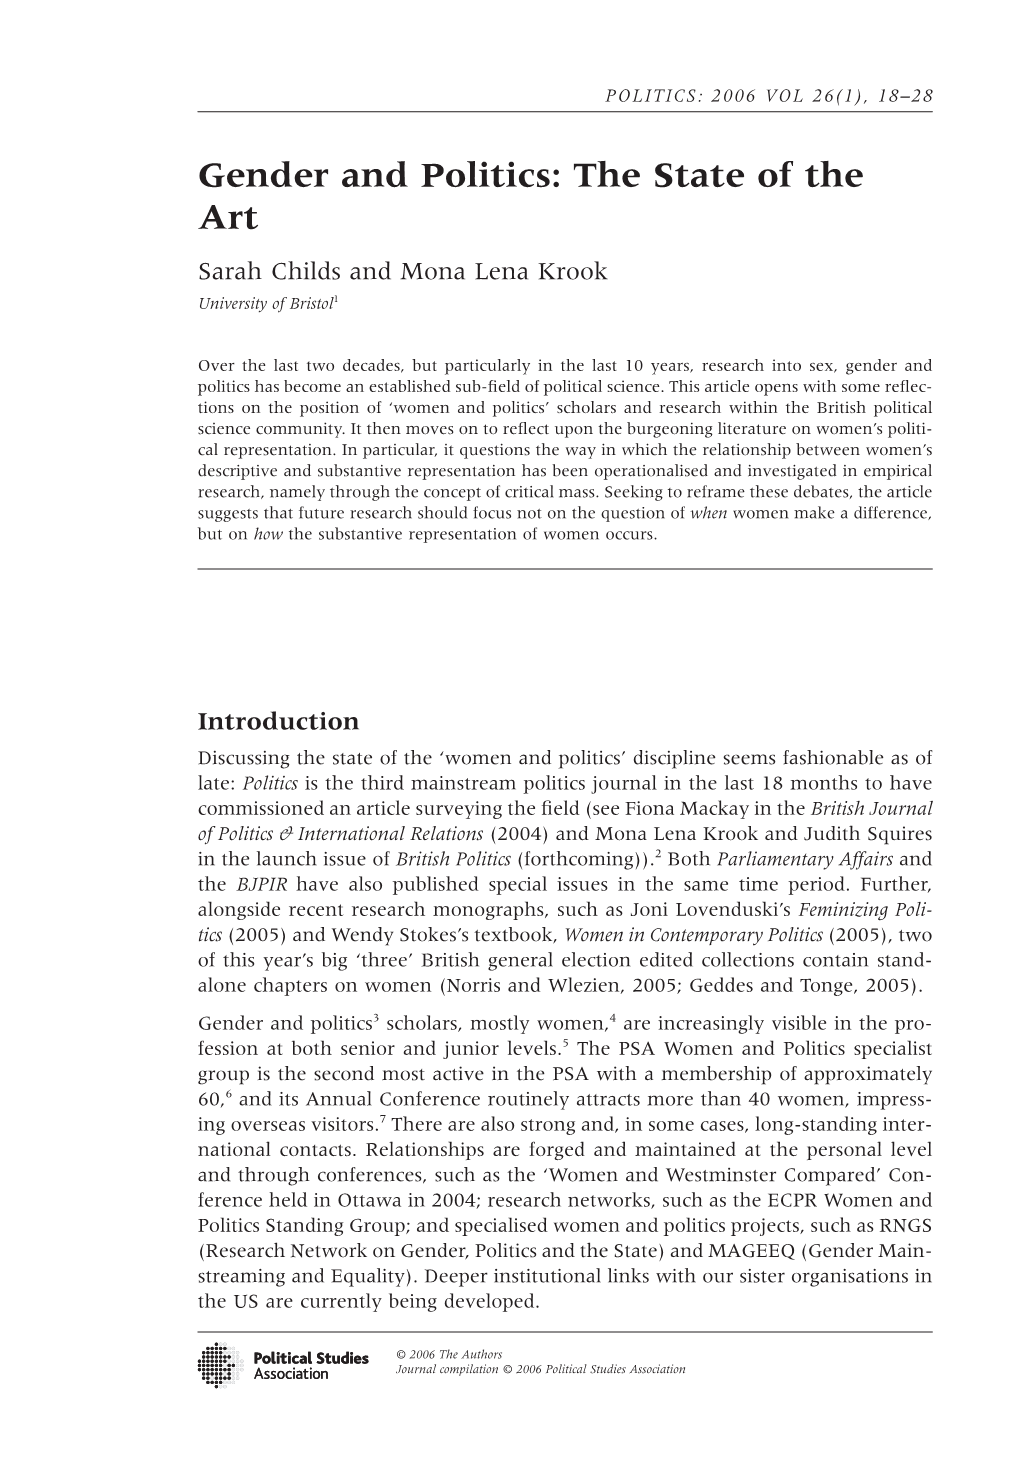 Gender and Politics: the State of the Art Sarah Childs and Mona Lena Krook University of Bristol1